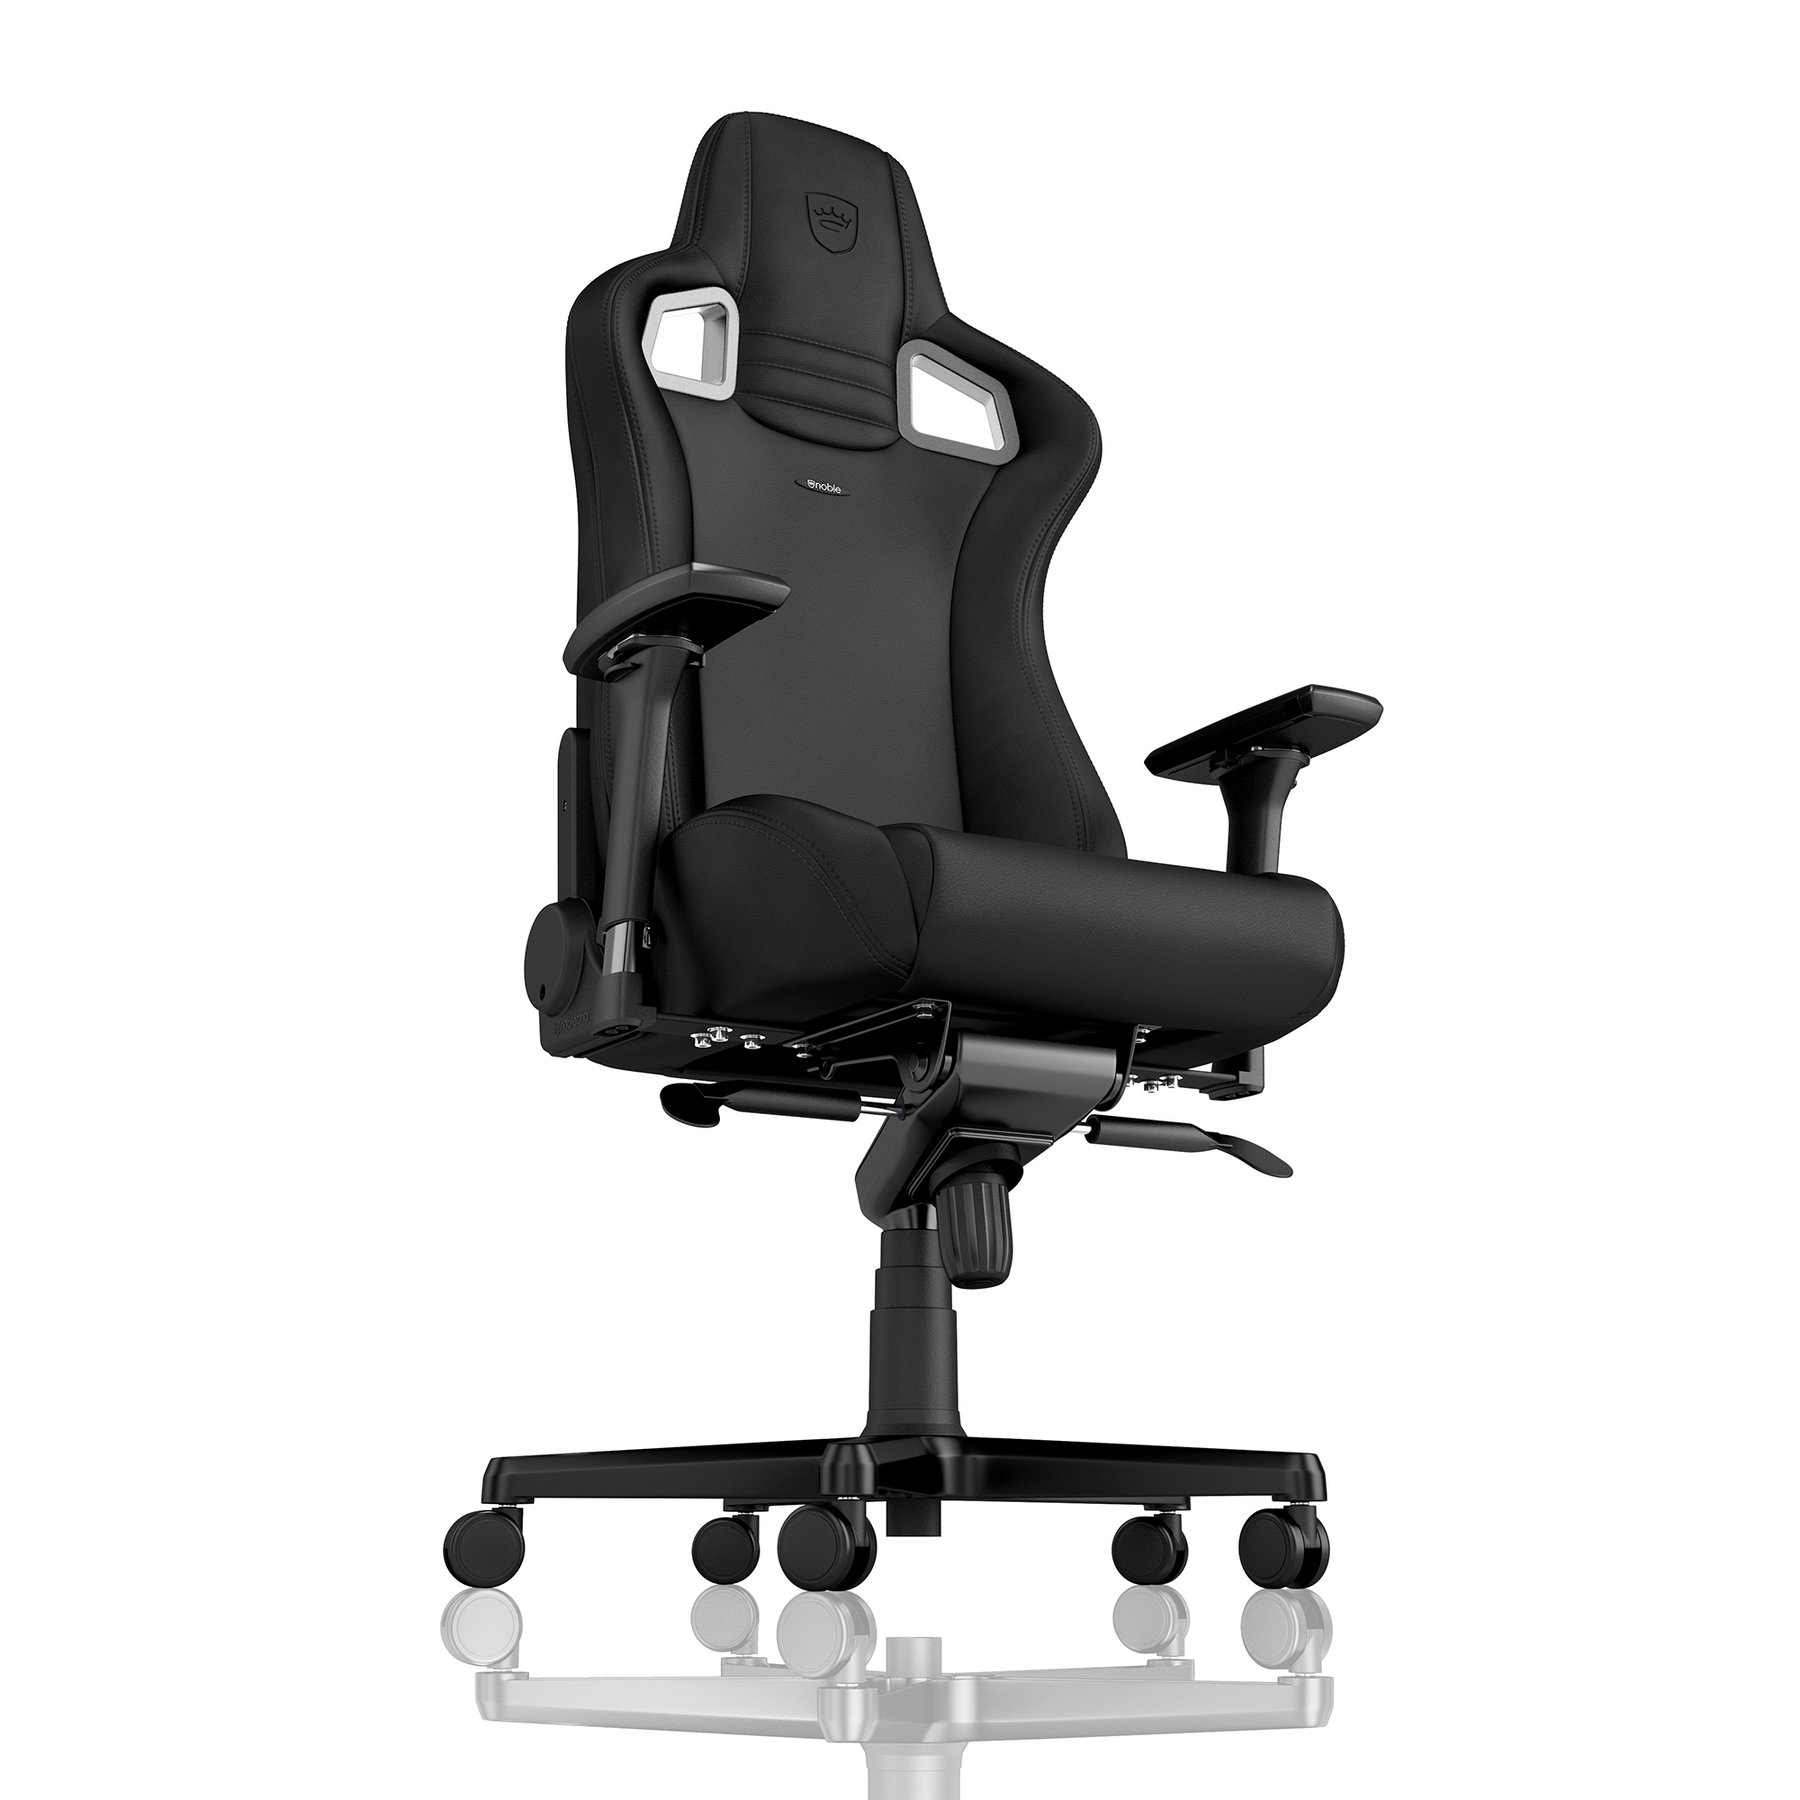 noblechairs - Cadeira noblechairs EPIC - Black Edition